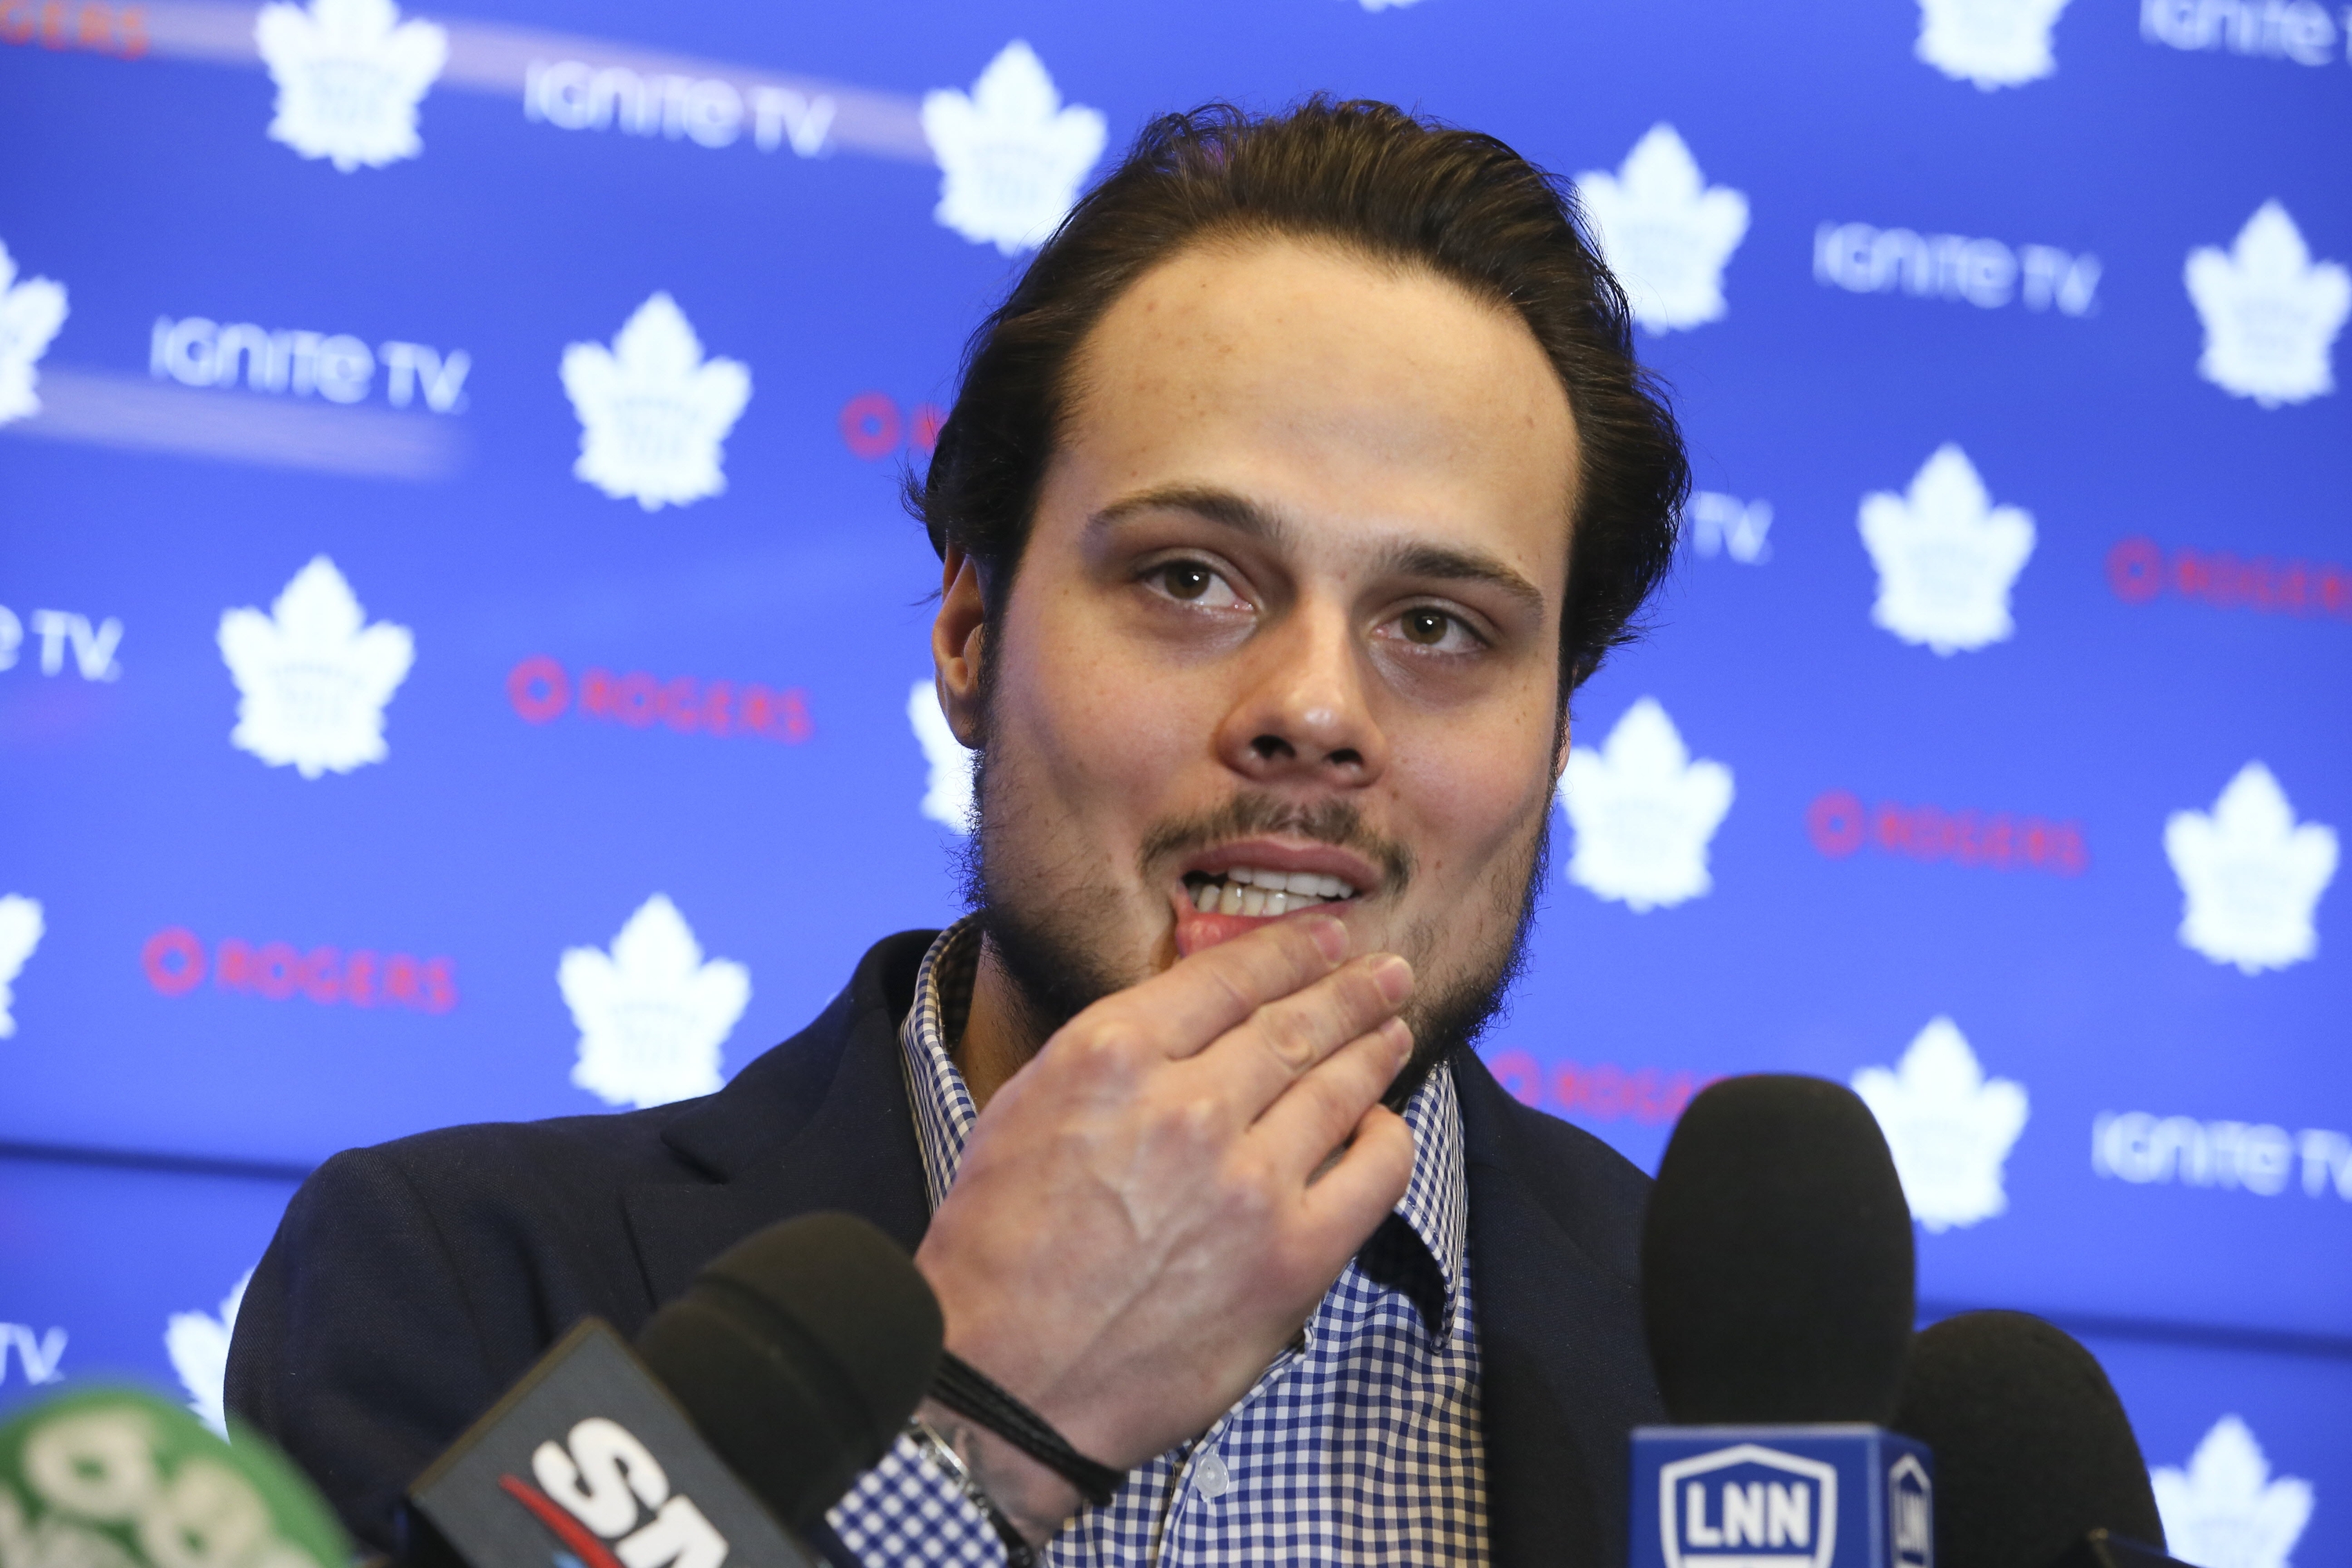 Gold on the Mind: Auston Matthews looking forward to first Olympic journey